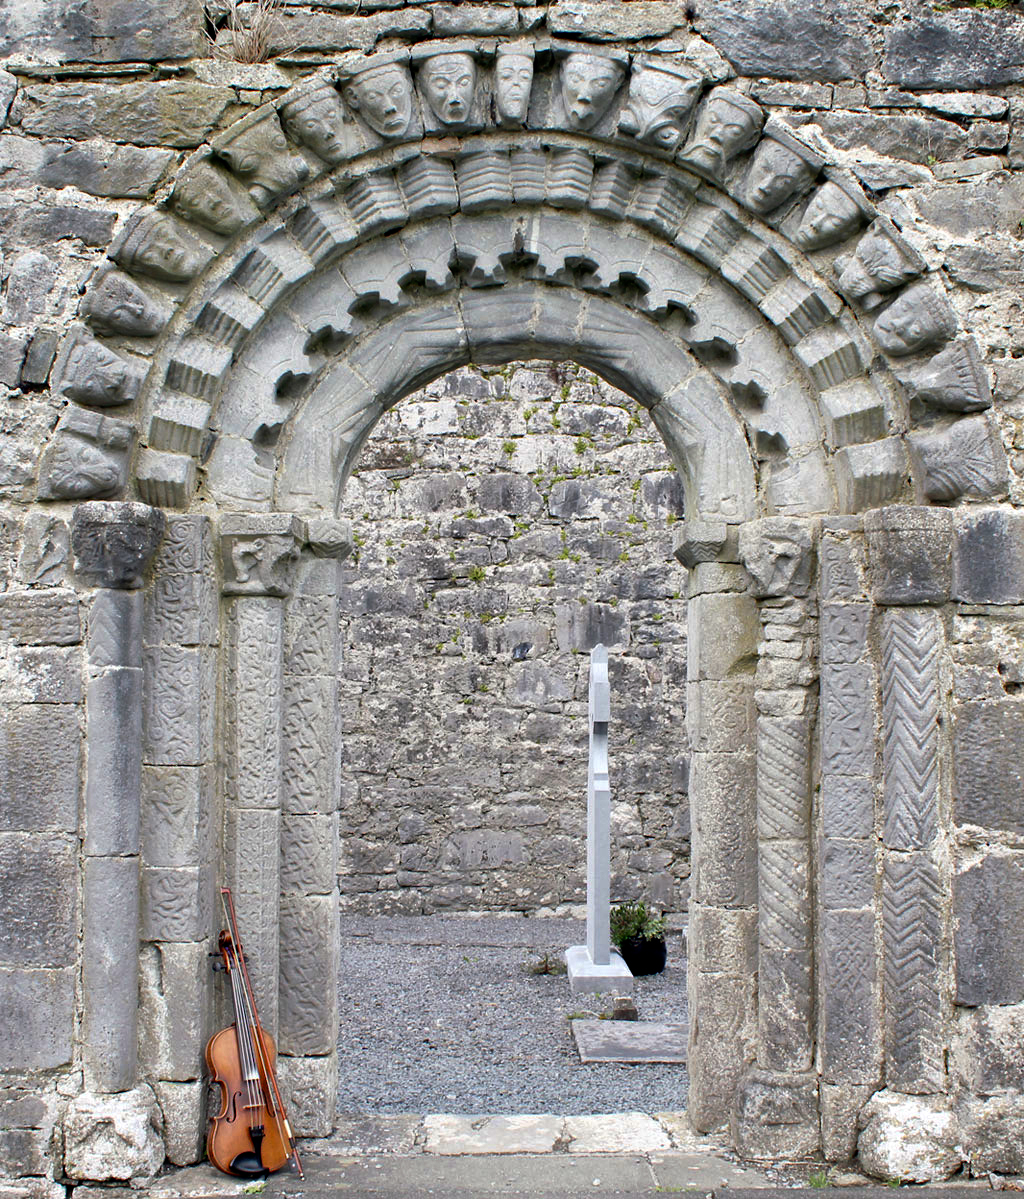 Carved Stone heads in County Clare.